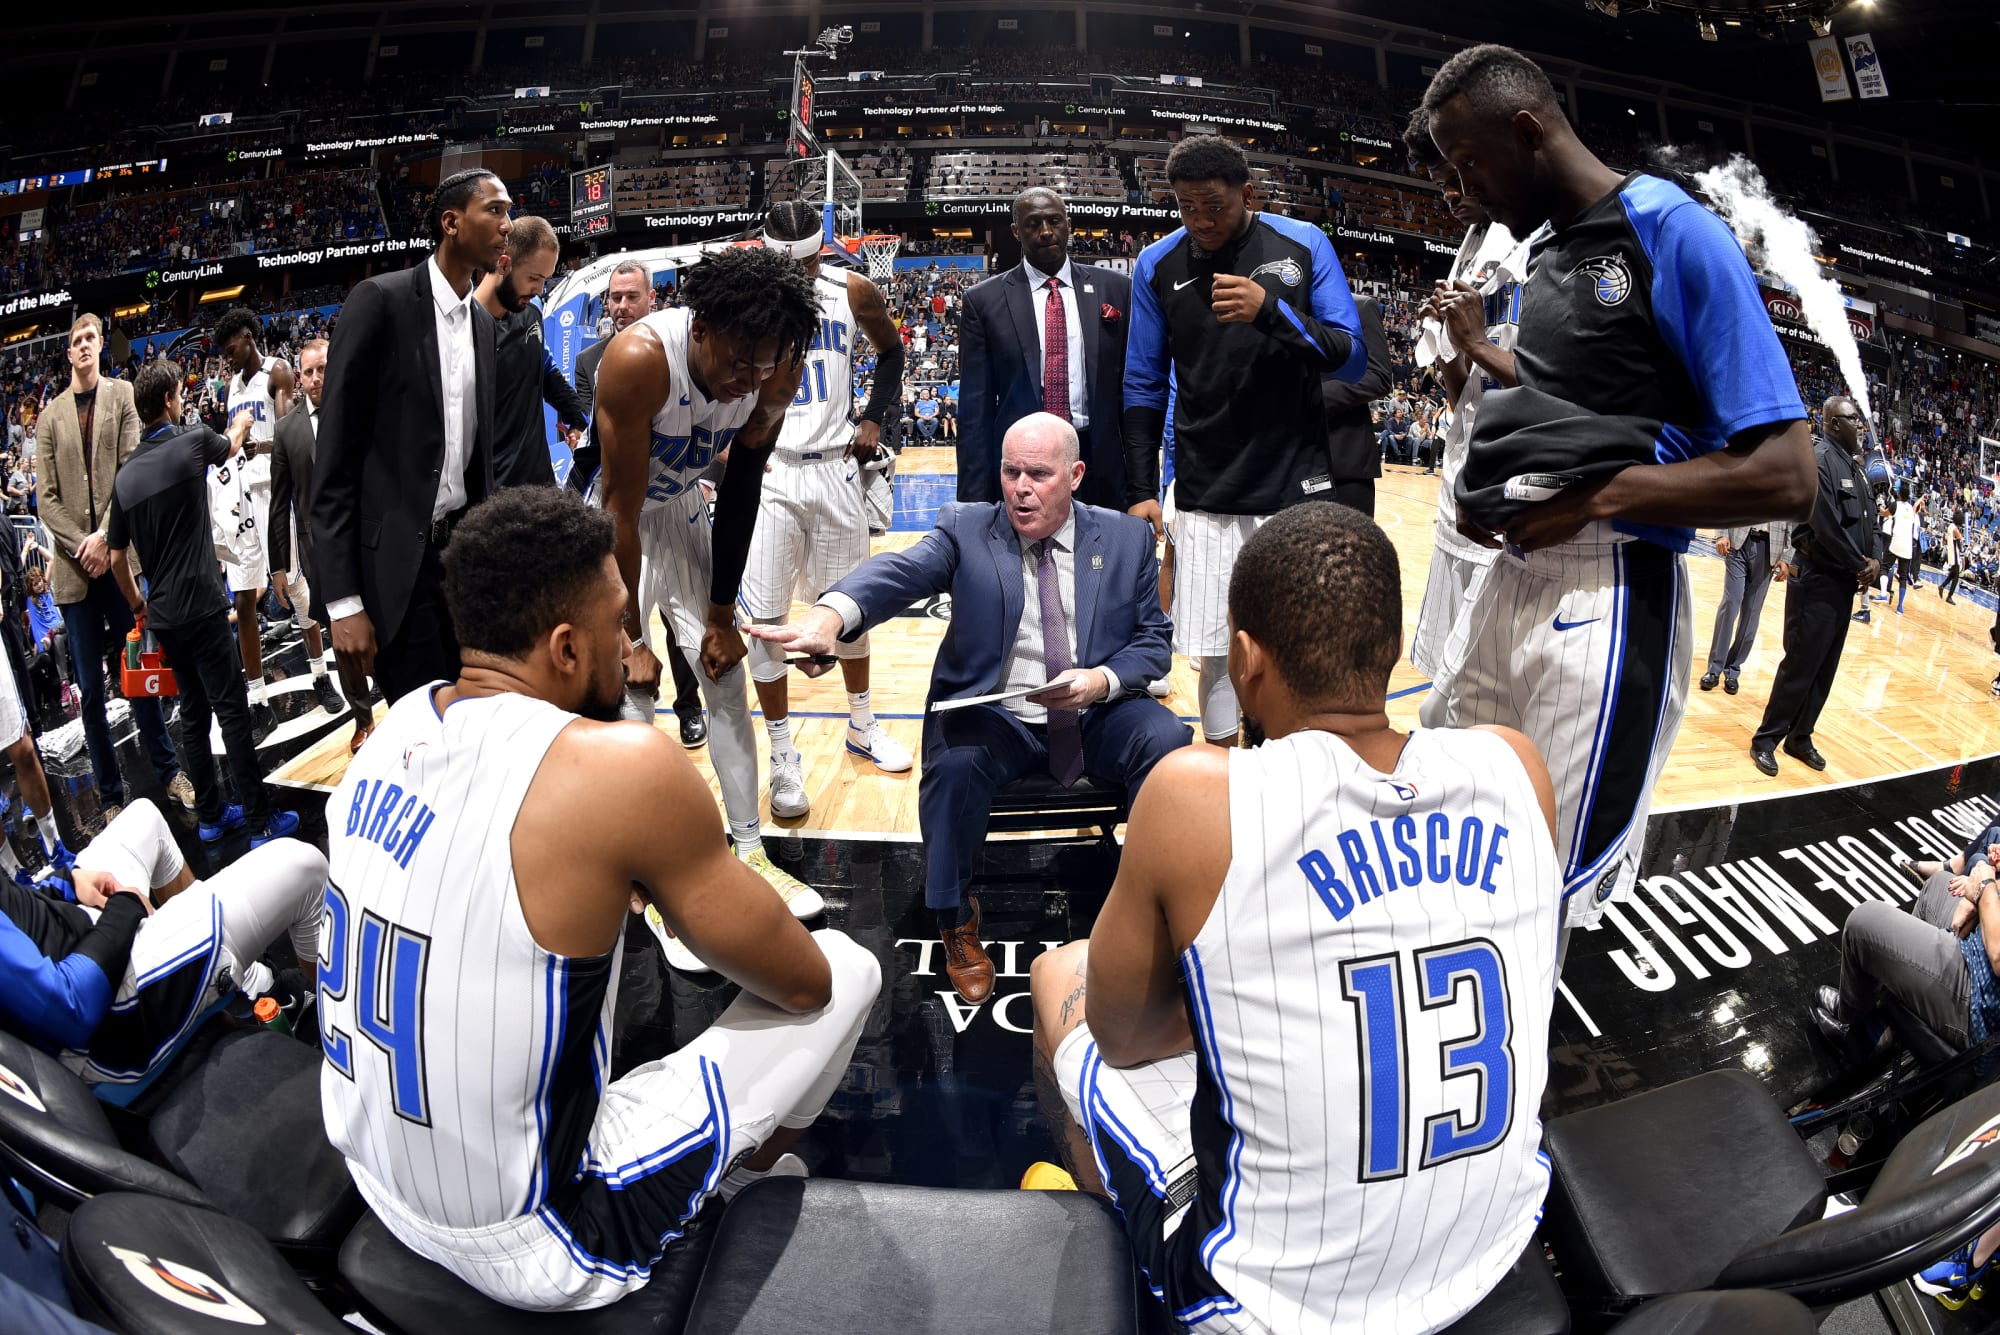 Orlando Magic The importance of January's schedule